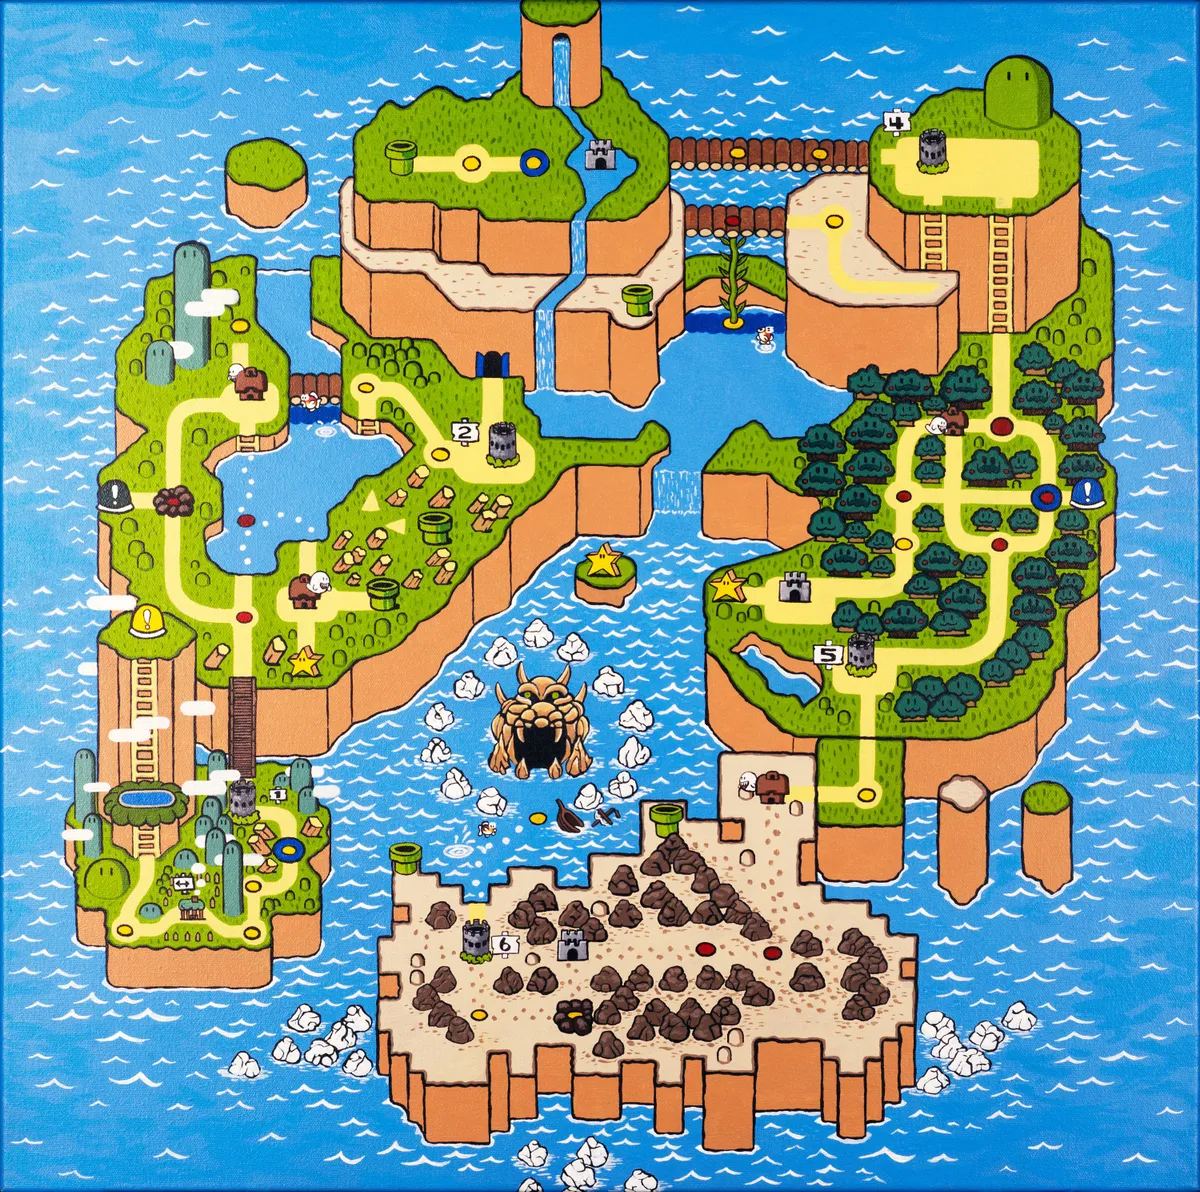 Map I'll use to move Mario over